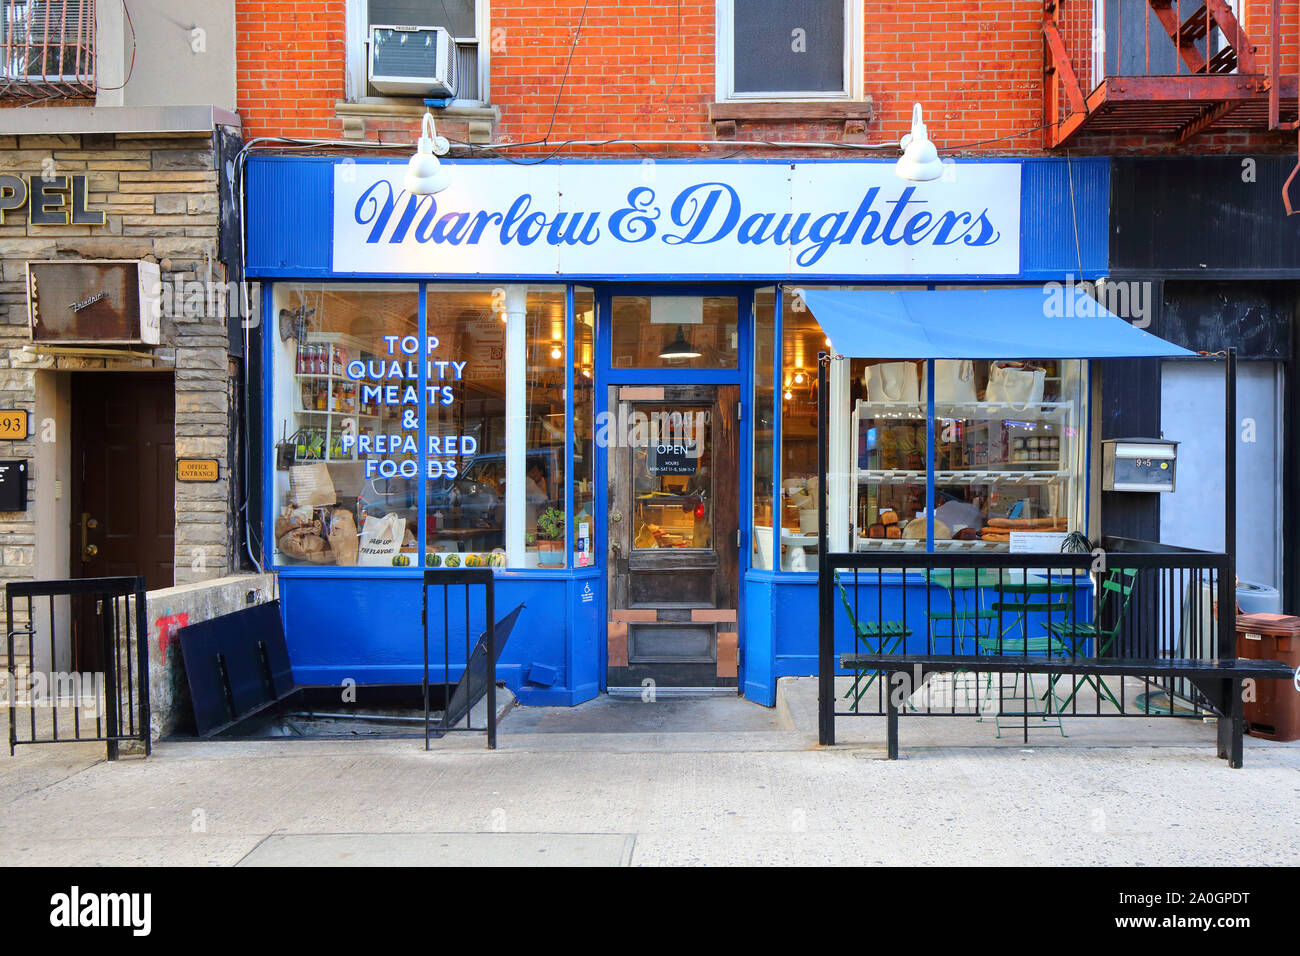 Marlow & Daughters, 95 Broadway, Brooklyn, NY. exterior storefront of a gourmet market and whole animal butcher in the Williamsburg neighborhood. Stock Photo